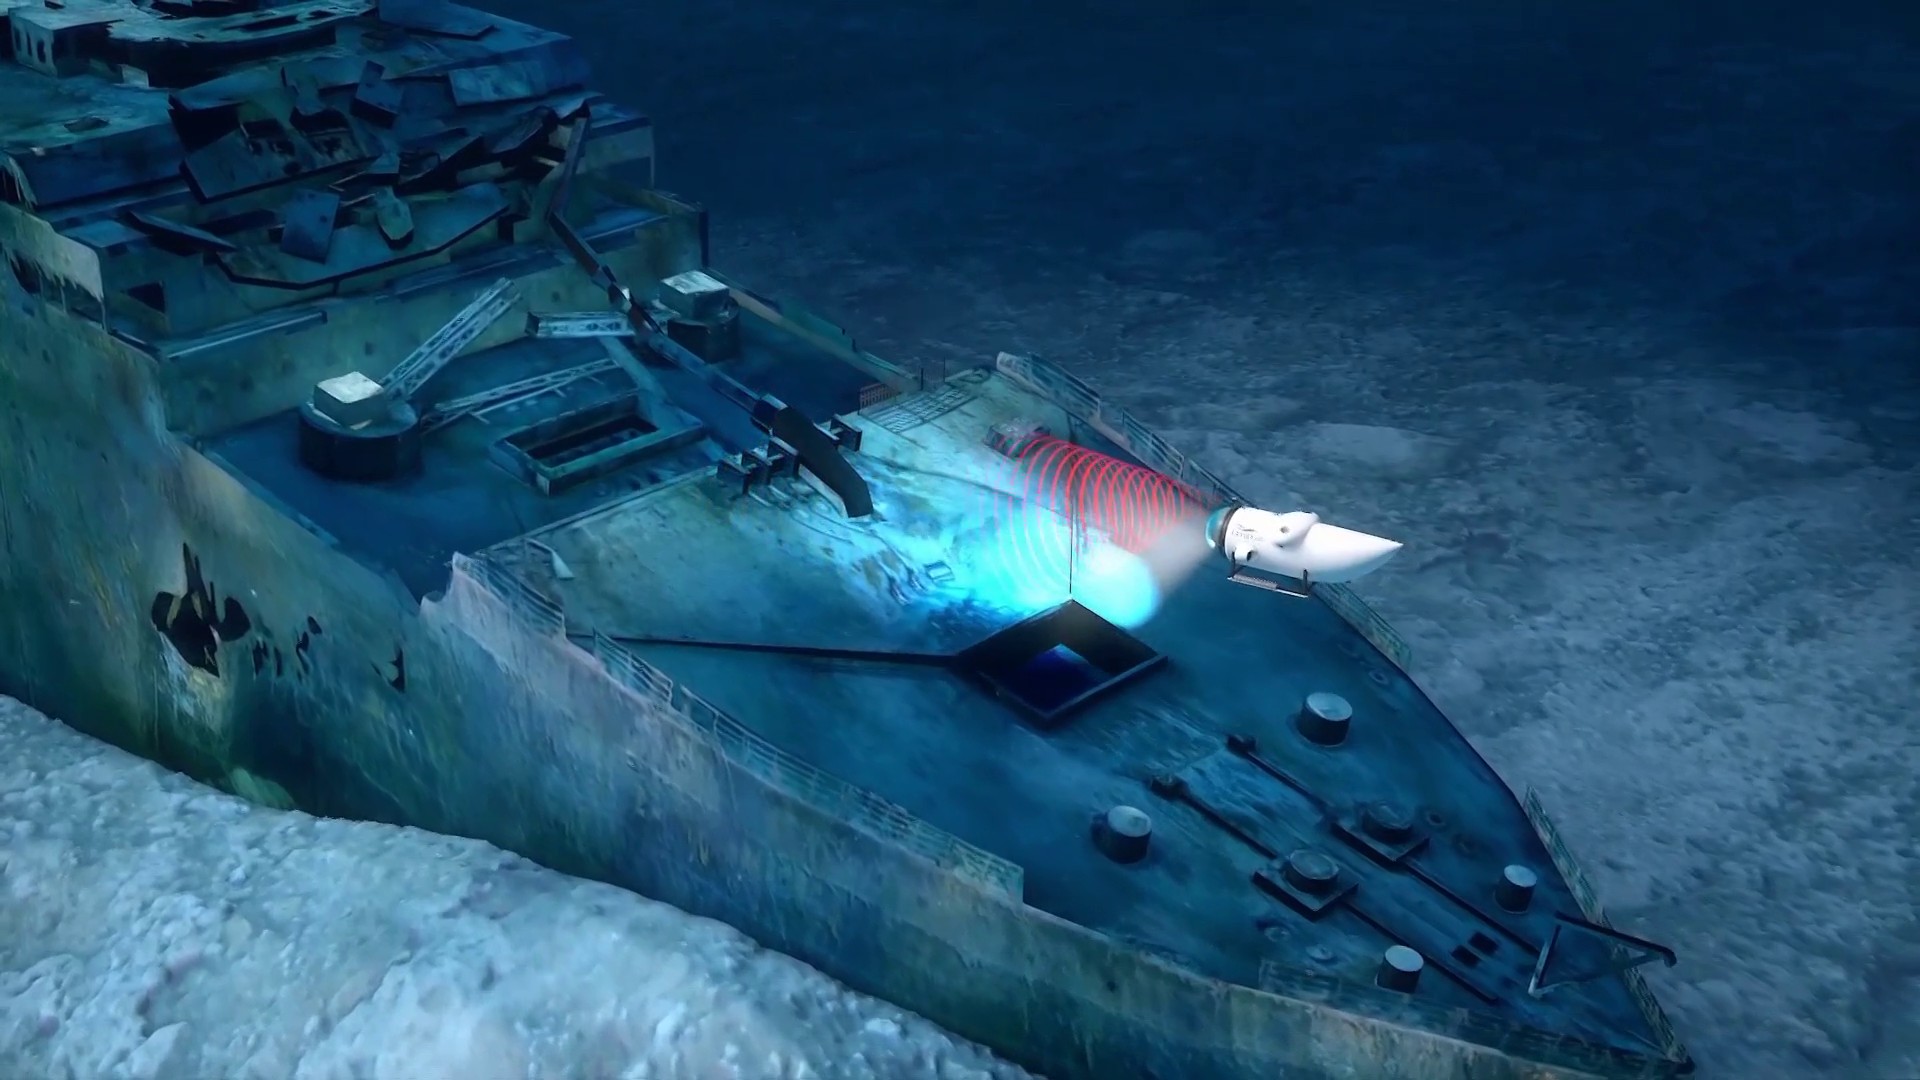 New images of Titanic emerge from submersible dive